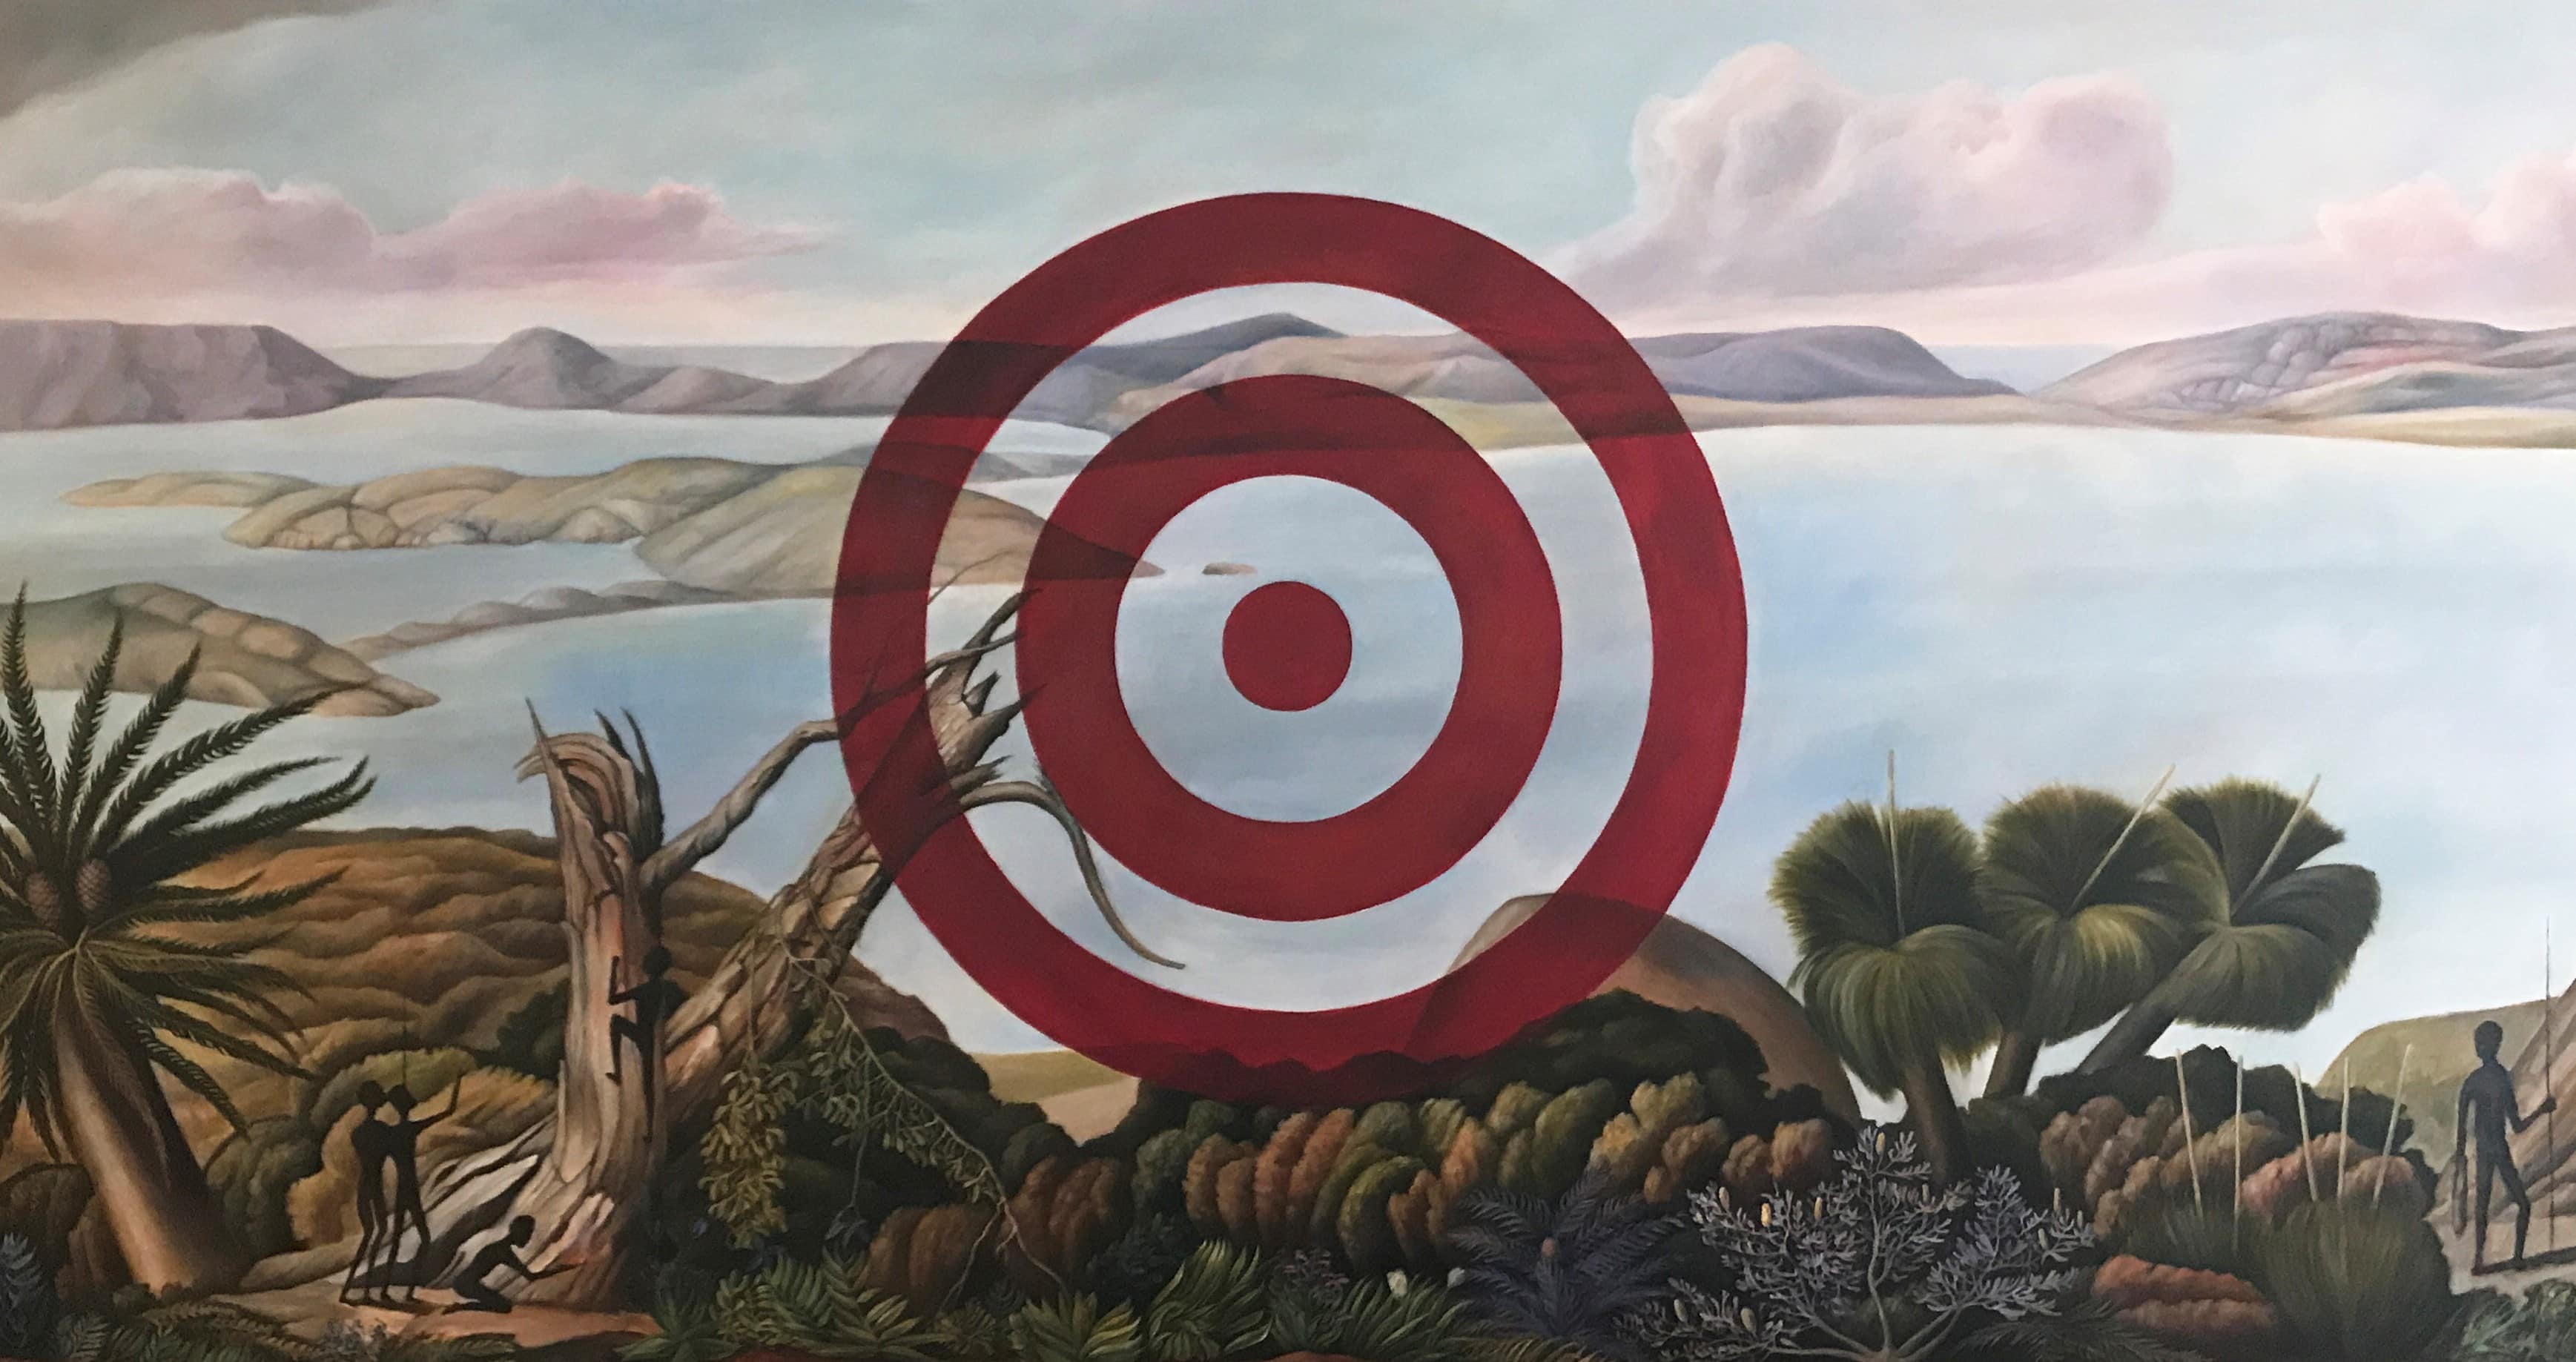 Christopher Pease, Target 3, 2018, 155x290cm